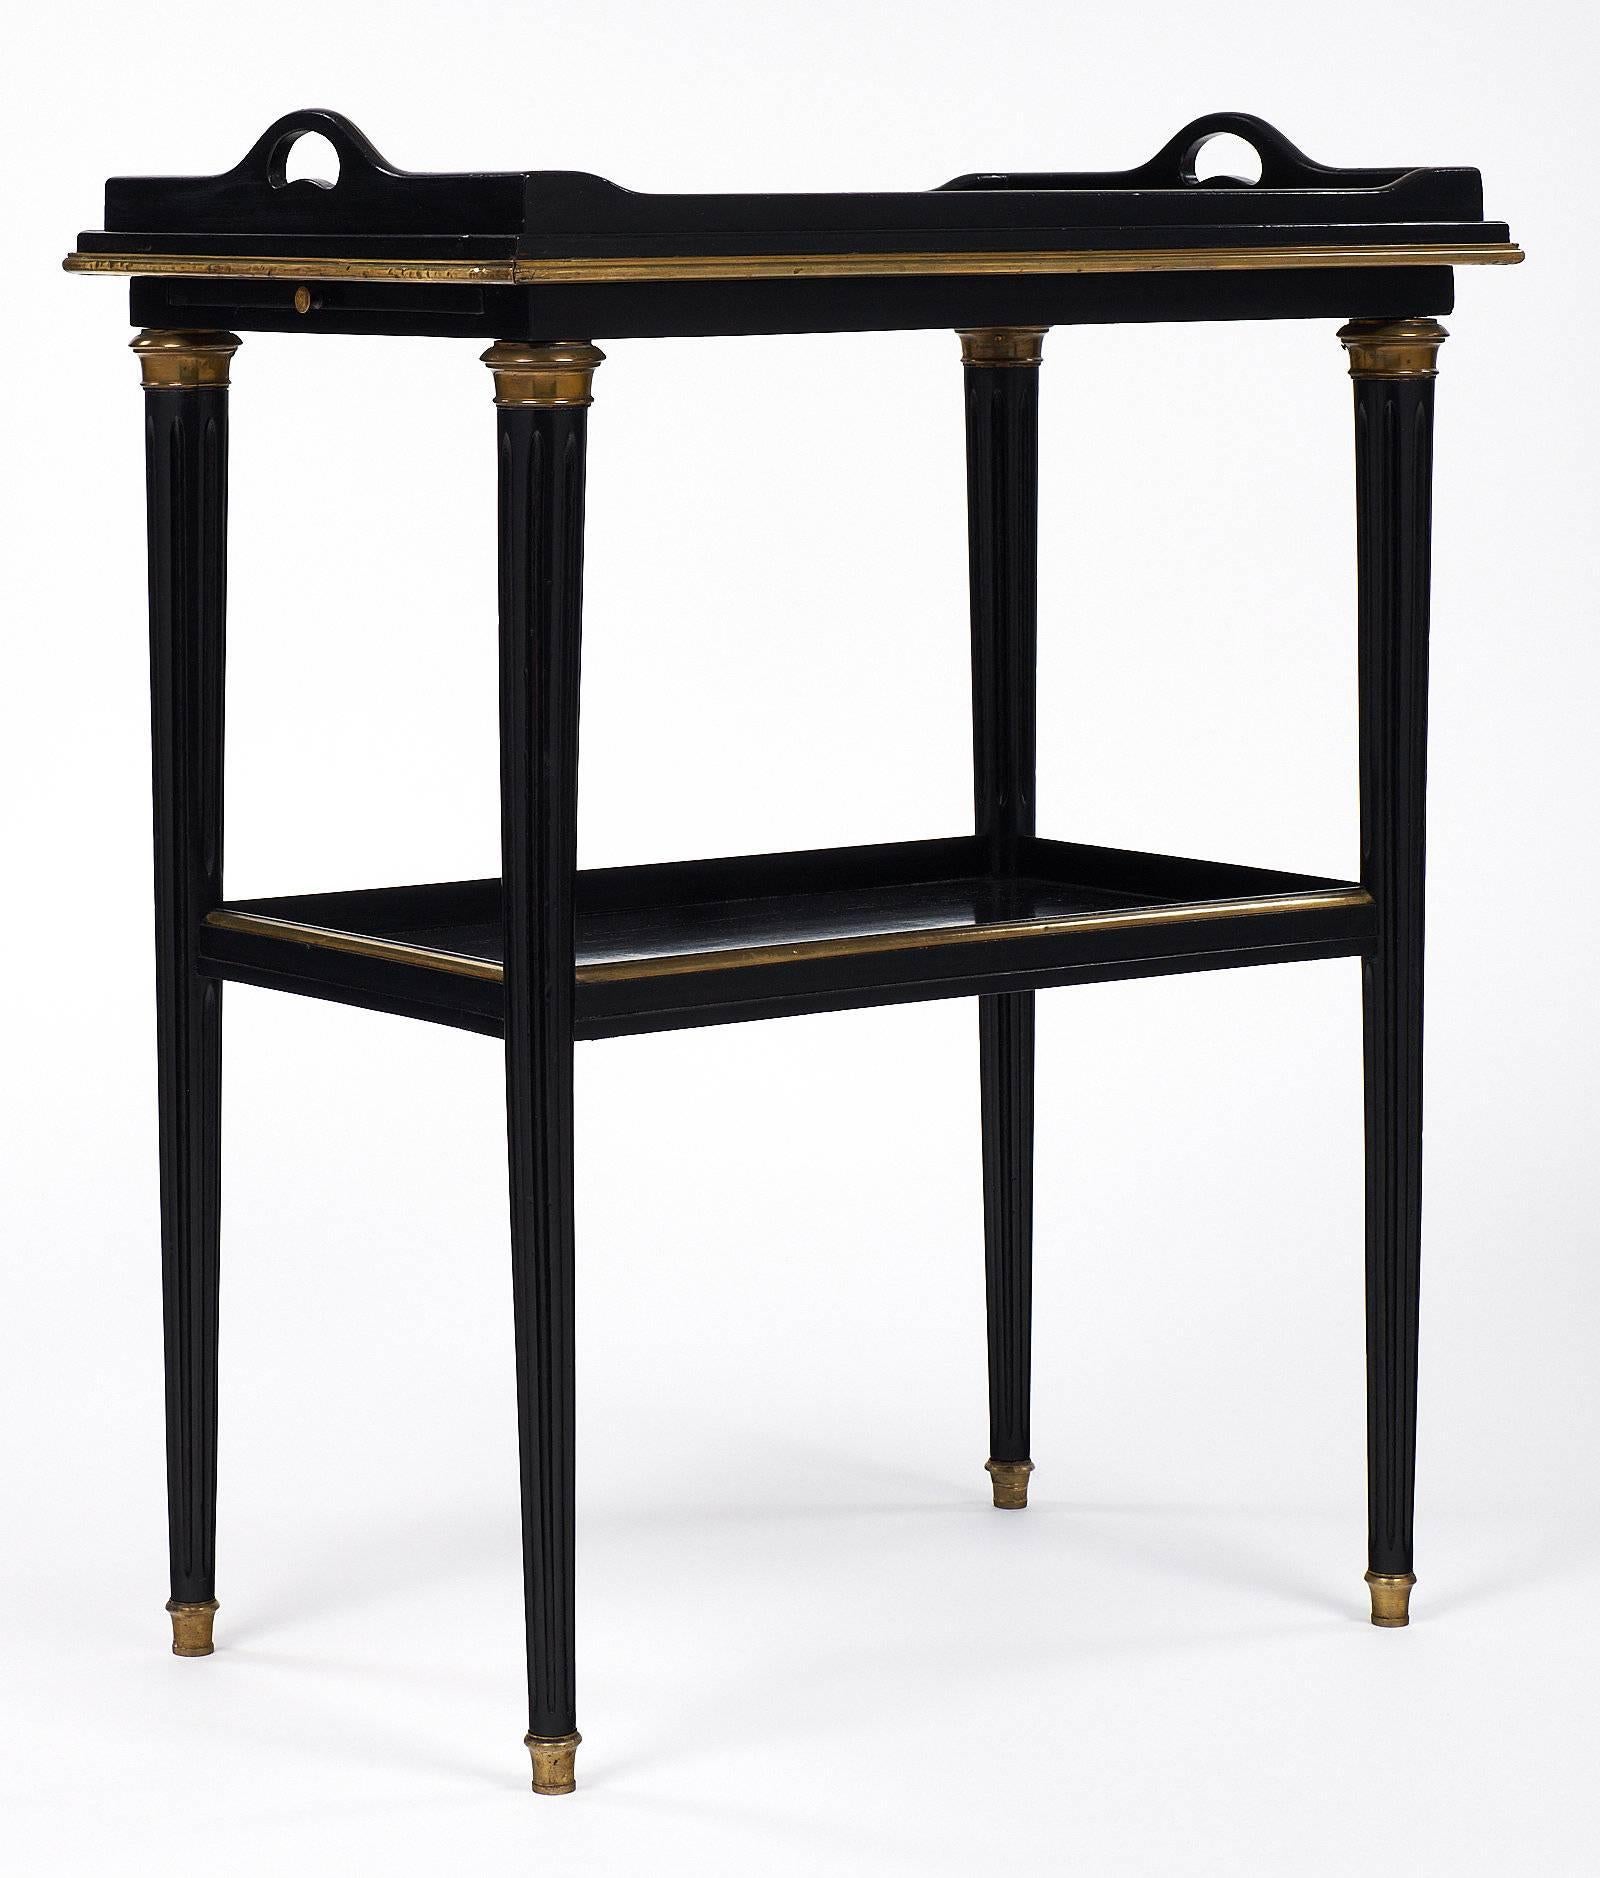 Lovely Napoleon III period antique French tray table in the Louis XVI style. This wonderful piece features a detachable try and a pull-out extension leaf. It has been ebonized and finished with a French polish. The table has bronze ormolu decor and